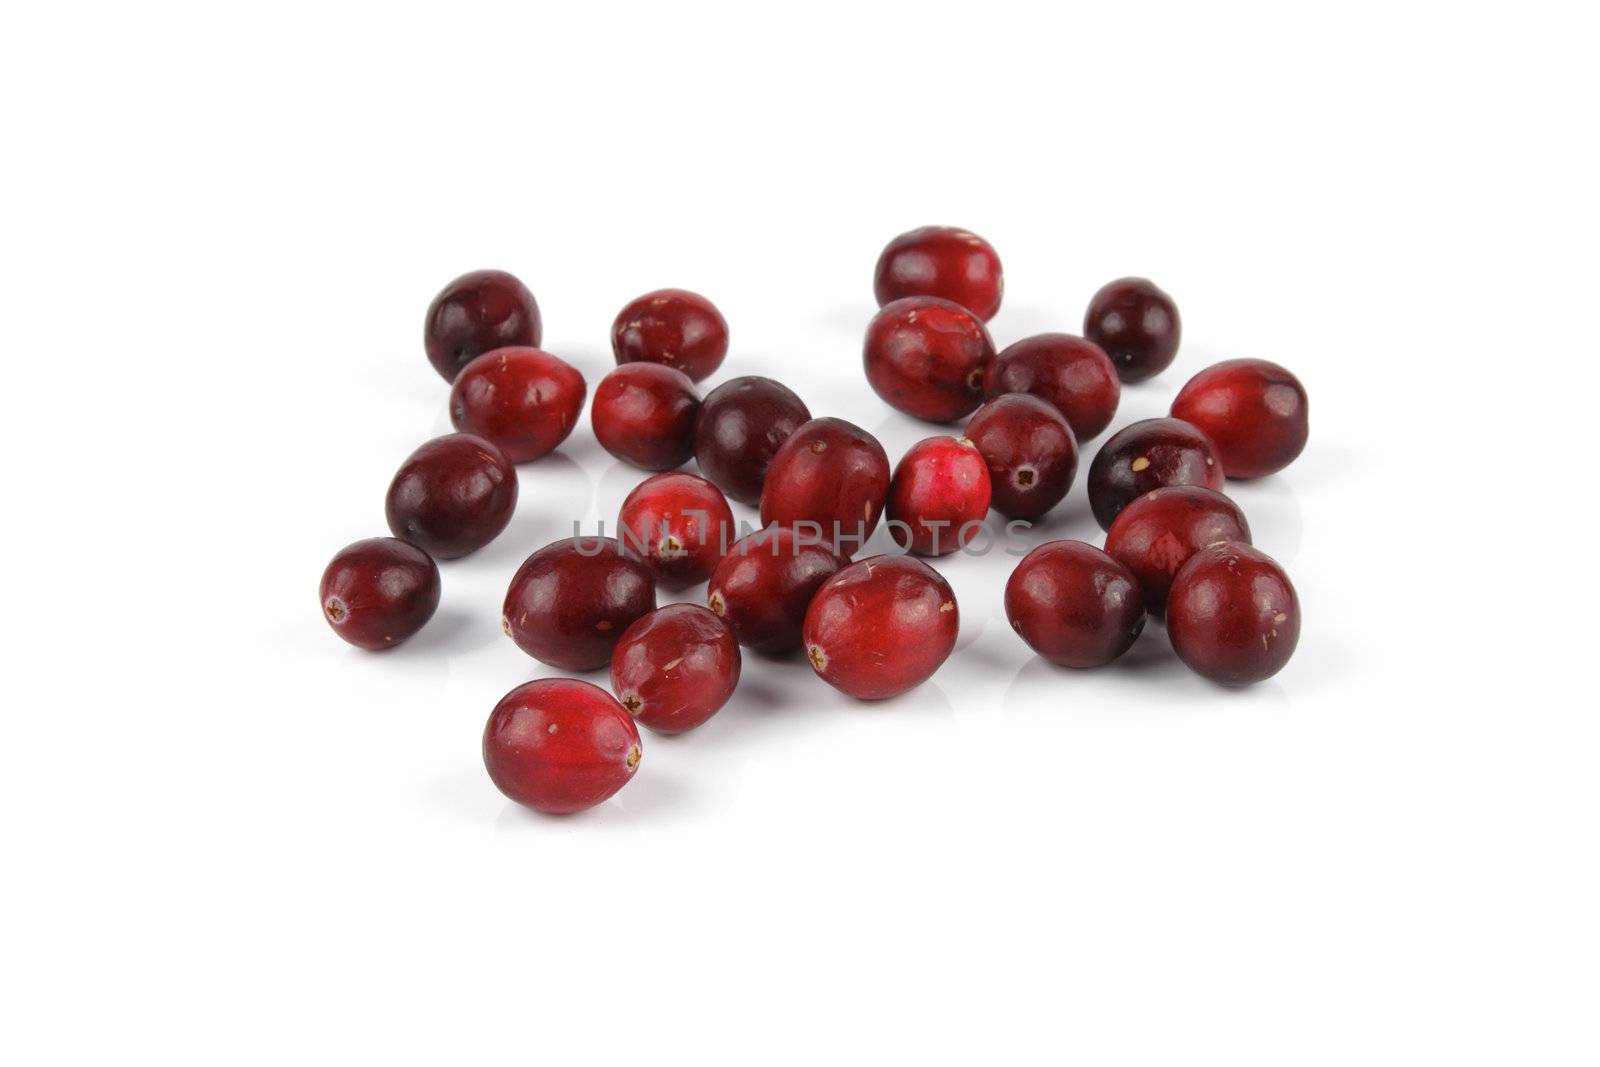 Red ripe juicy cranberries on a reflective white background